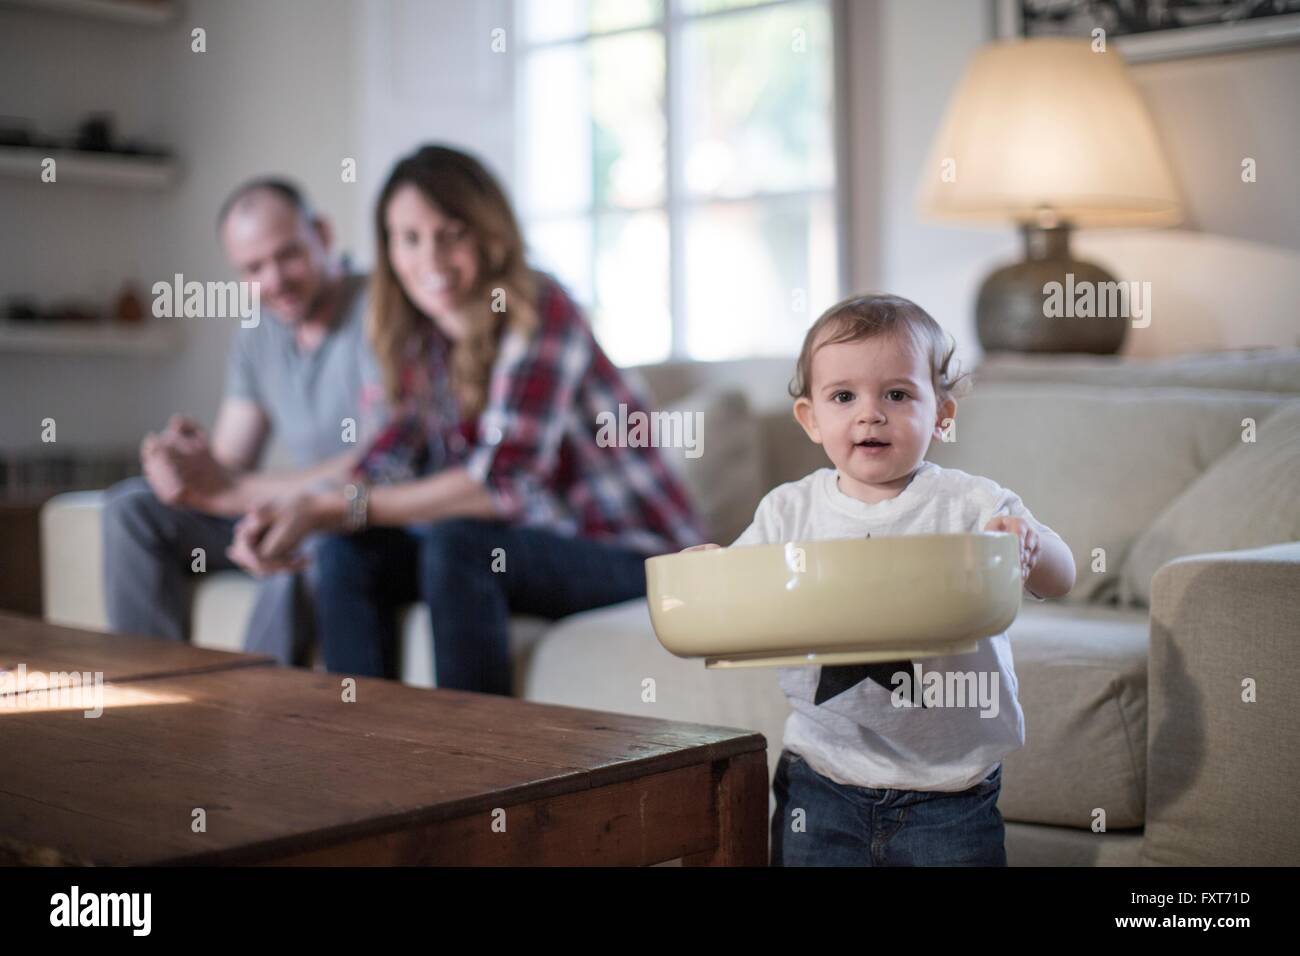 Baby Boy in living room holding grand bol looking at camera smiling Banque D'Images